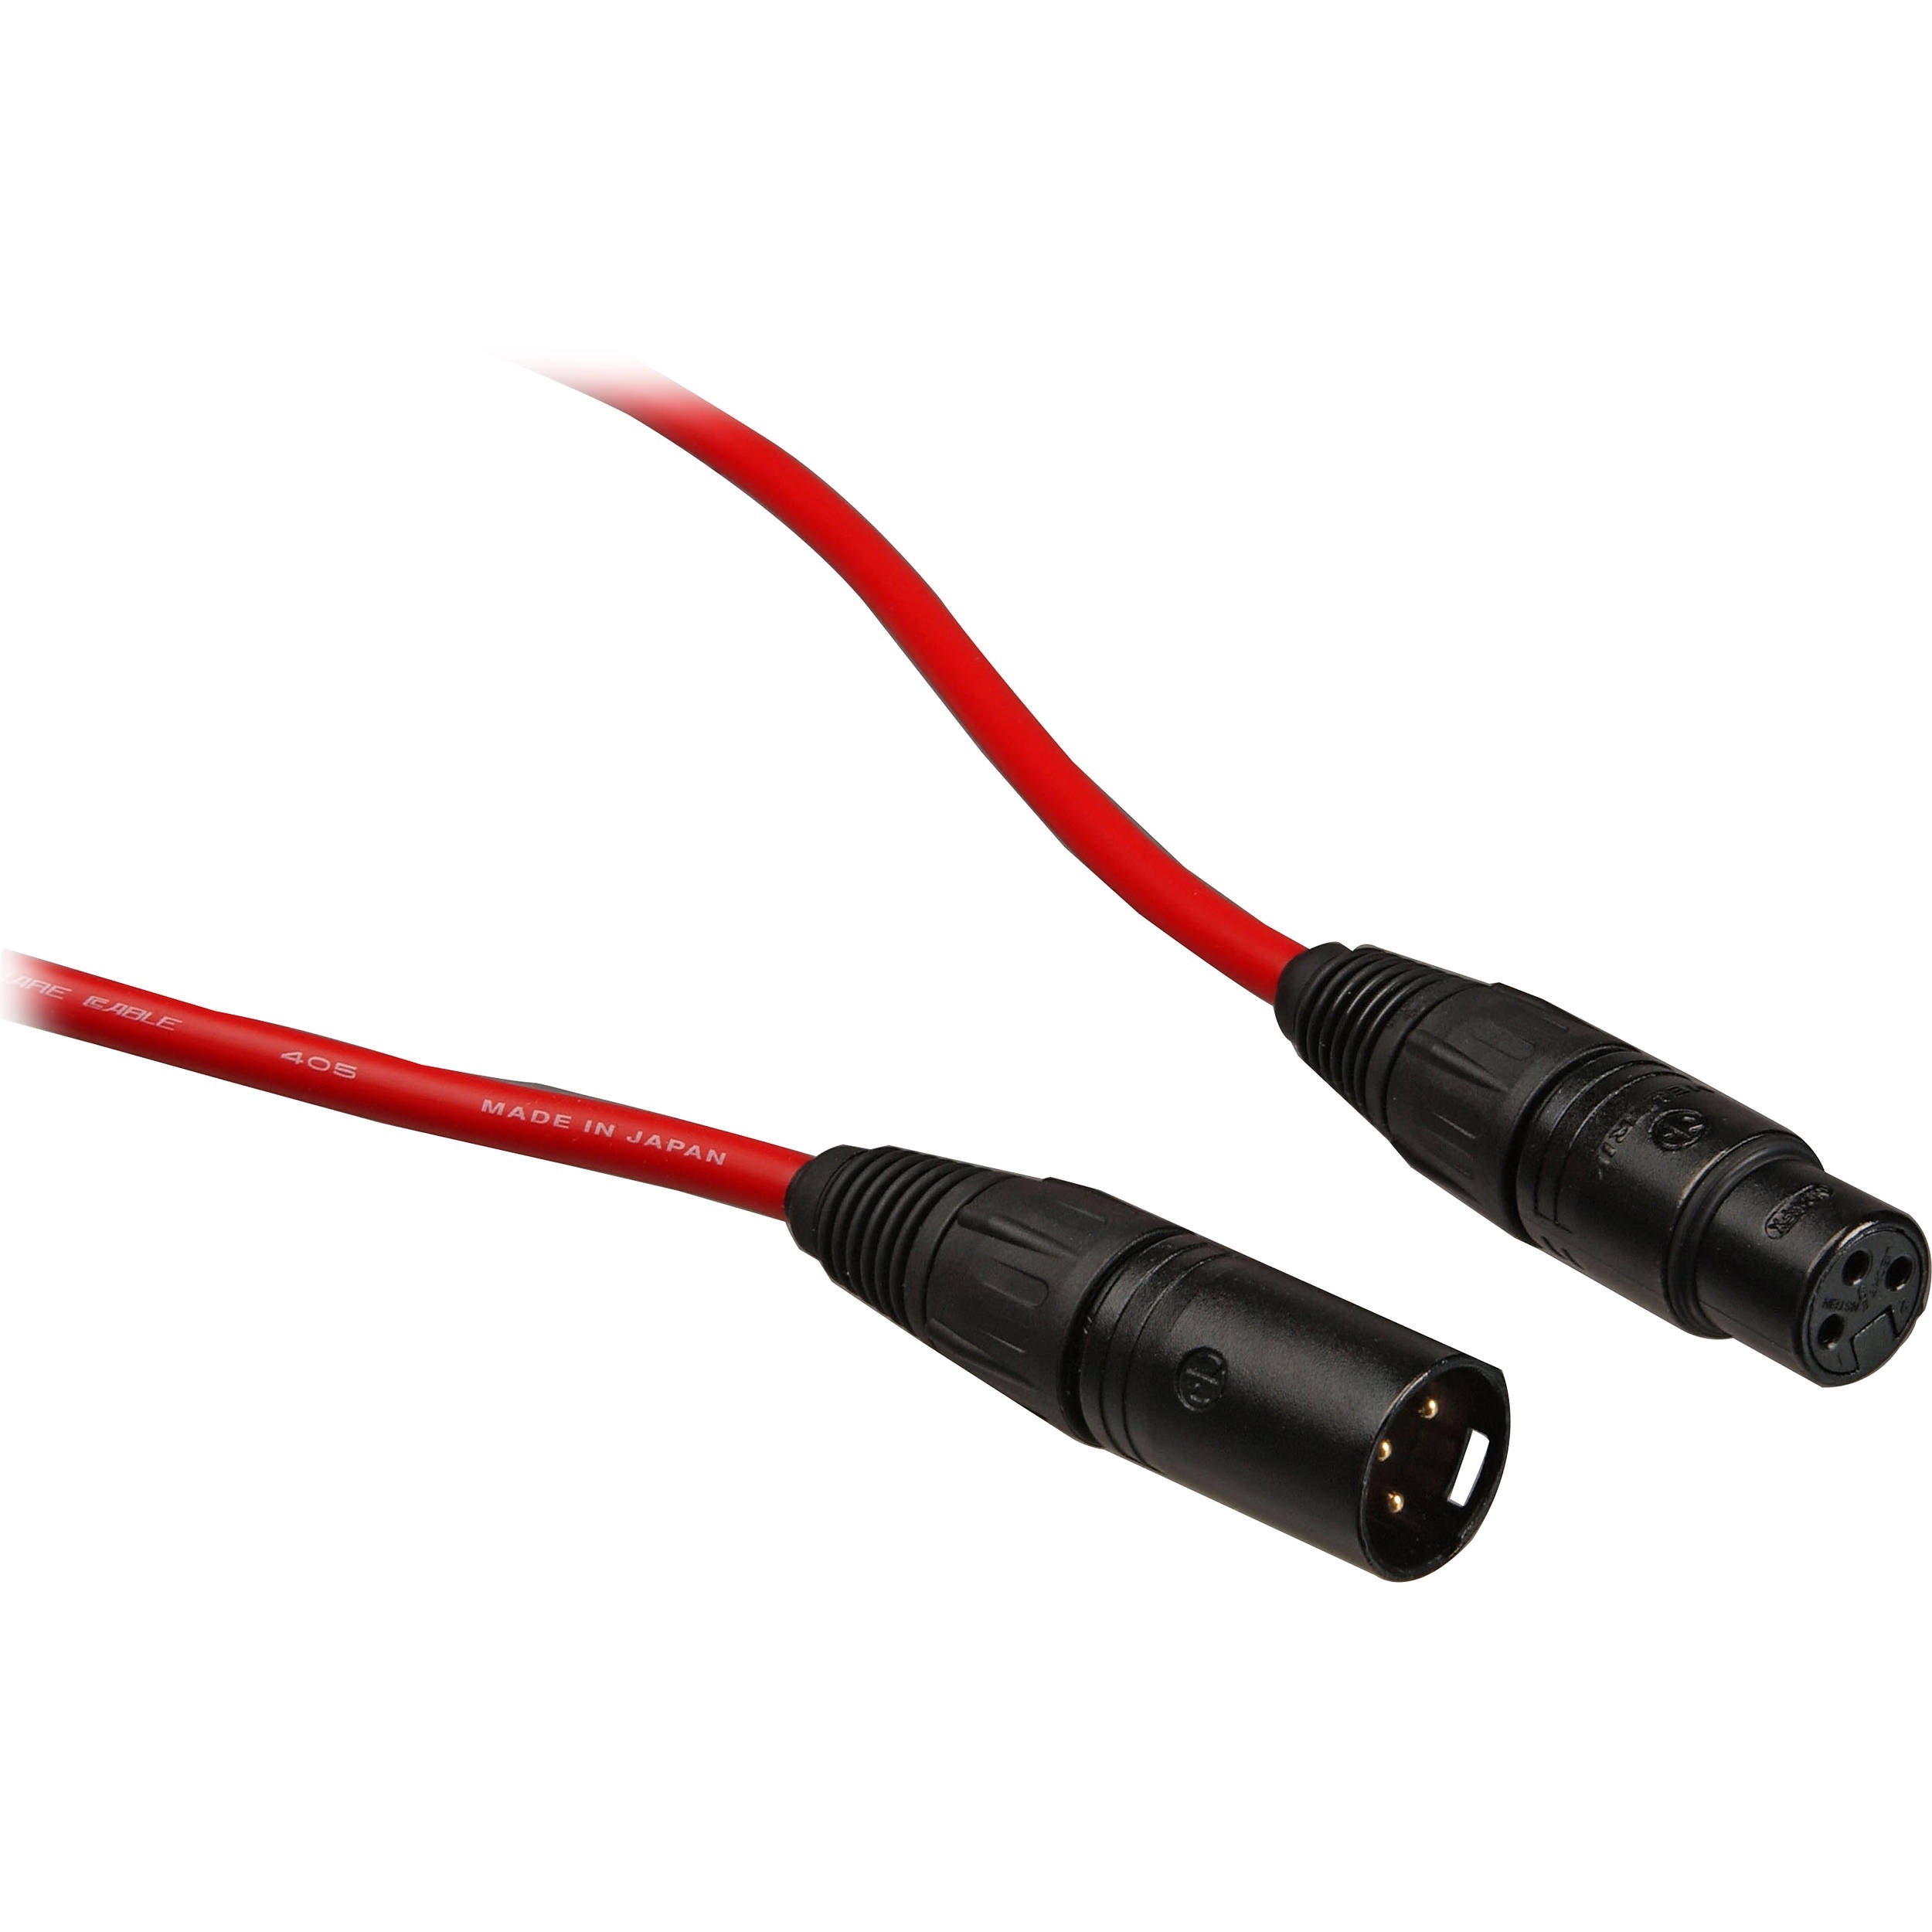 Canare L-4E6S Star Quad XLRM to XLRF Microphone Cable - 75' (Red)